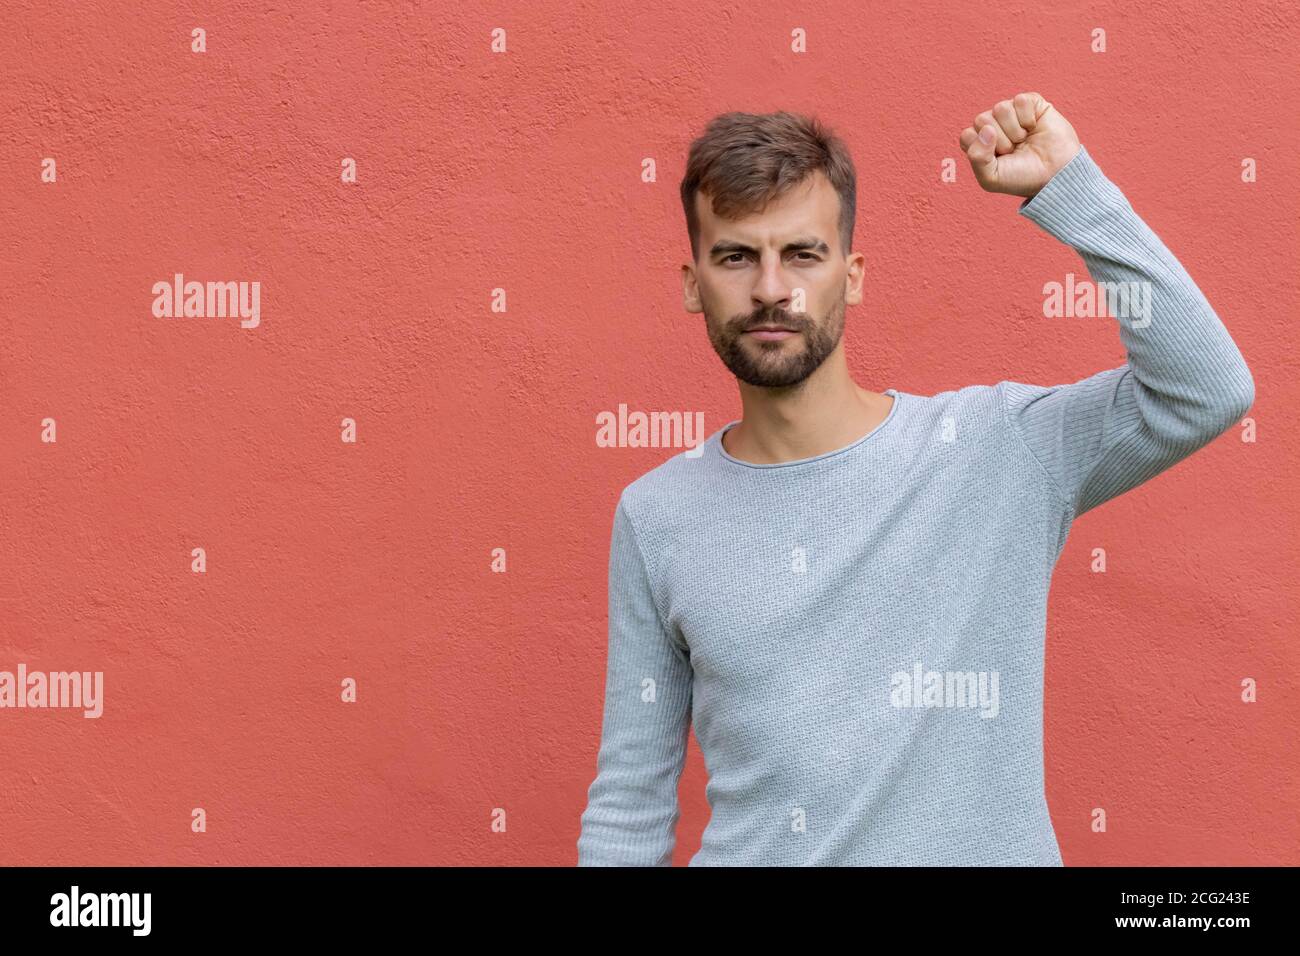 Determined guy raising up fist in air over red wall background. Young man demonstrating power. Protest concept. Stock Photo